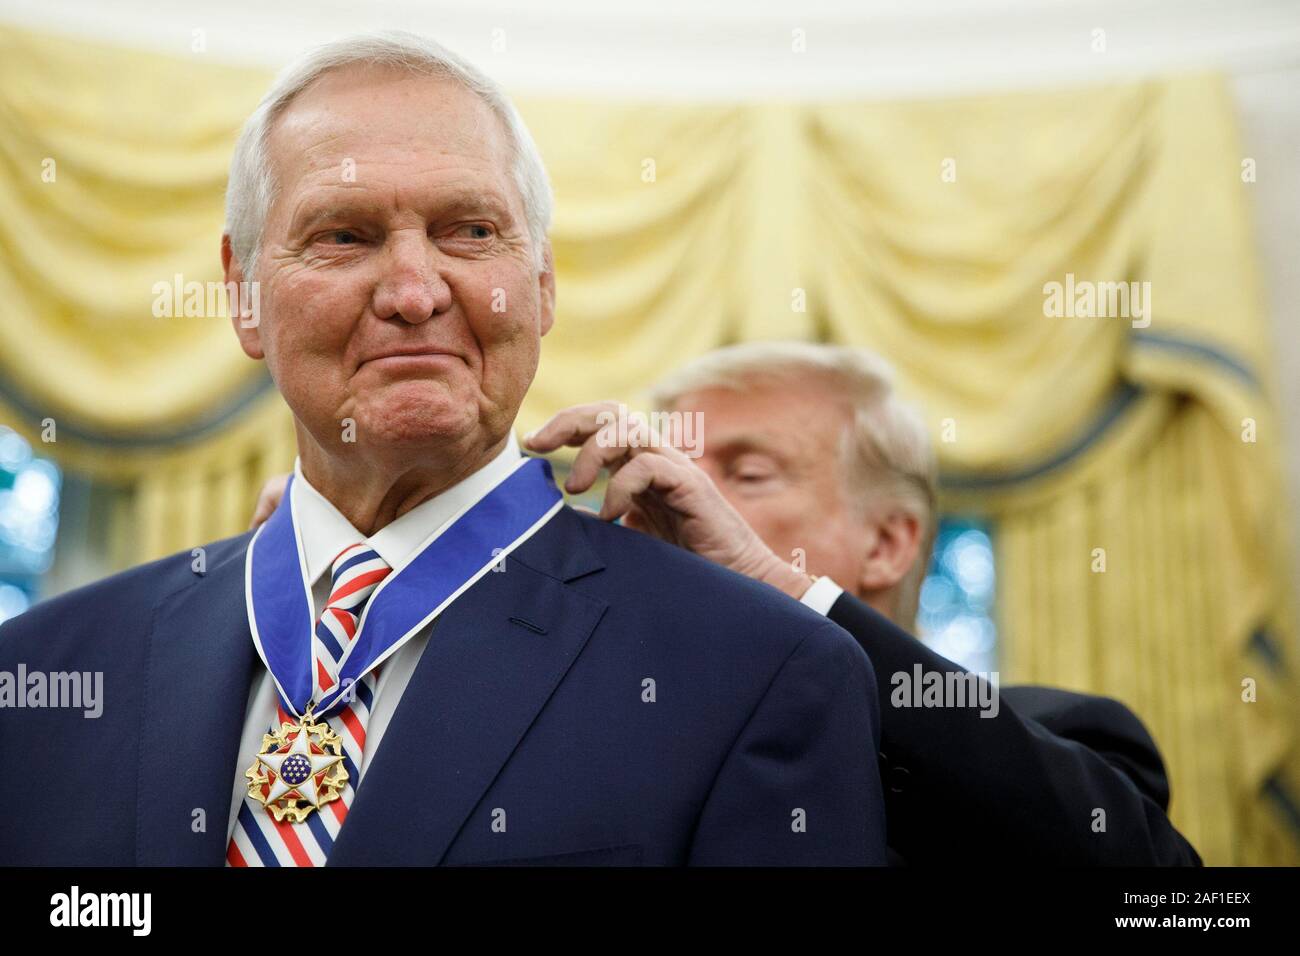 Washington, United States. 12th Dec, 2019. President Donald Trump presents the Presidential Medal of Freedom to NBA Hall of Fame member Jerry West during a ceremony inside of the Oval Office on September 5, 2019, at the White House in Washington. West, 81, graduated from West Virginia University and played fourteen seasons with the Los Angeles Lakers. Pool Photo by Tom Brenner/UPI Credit: UPI/Alamy Live News Stock Photo